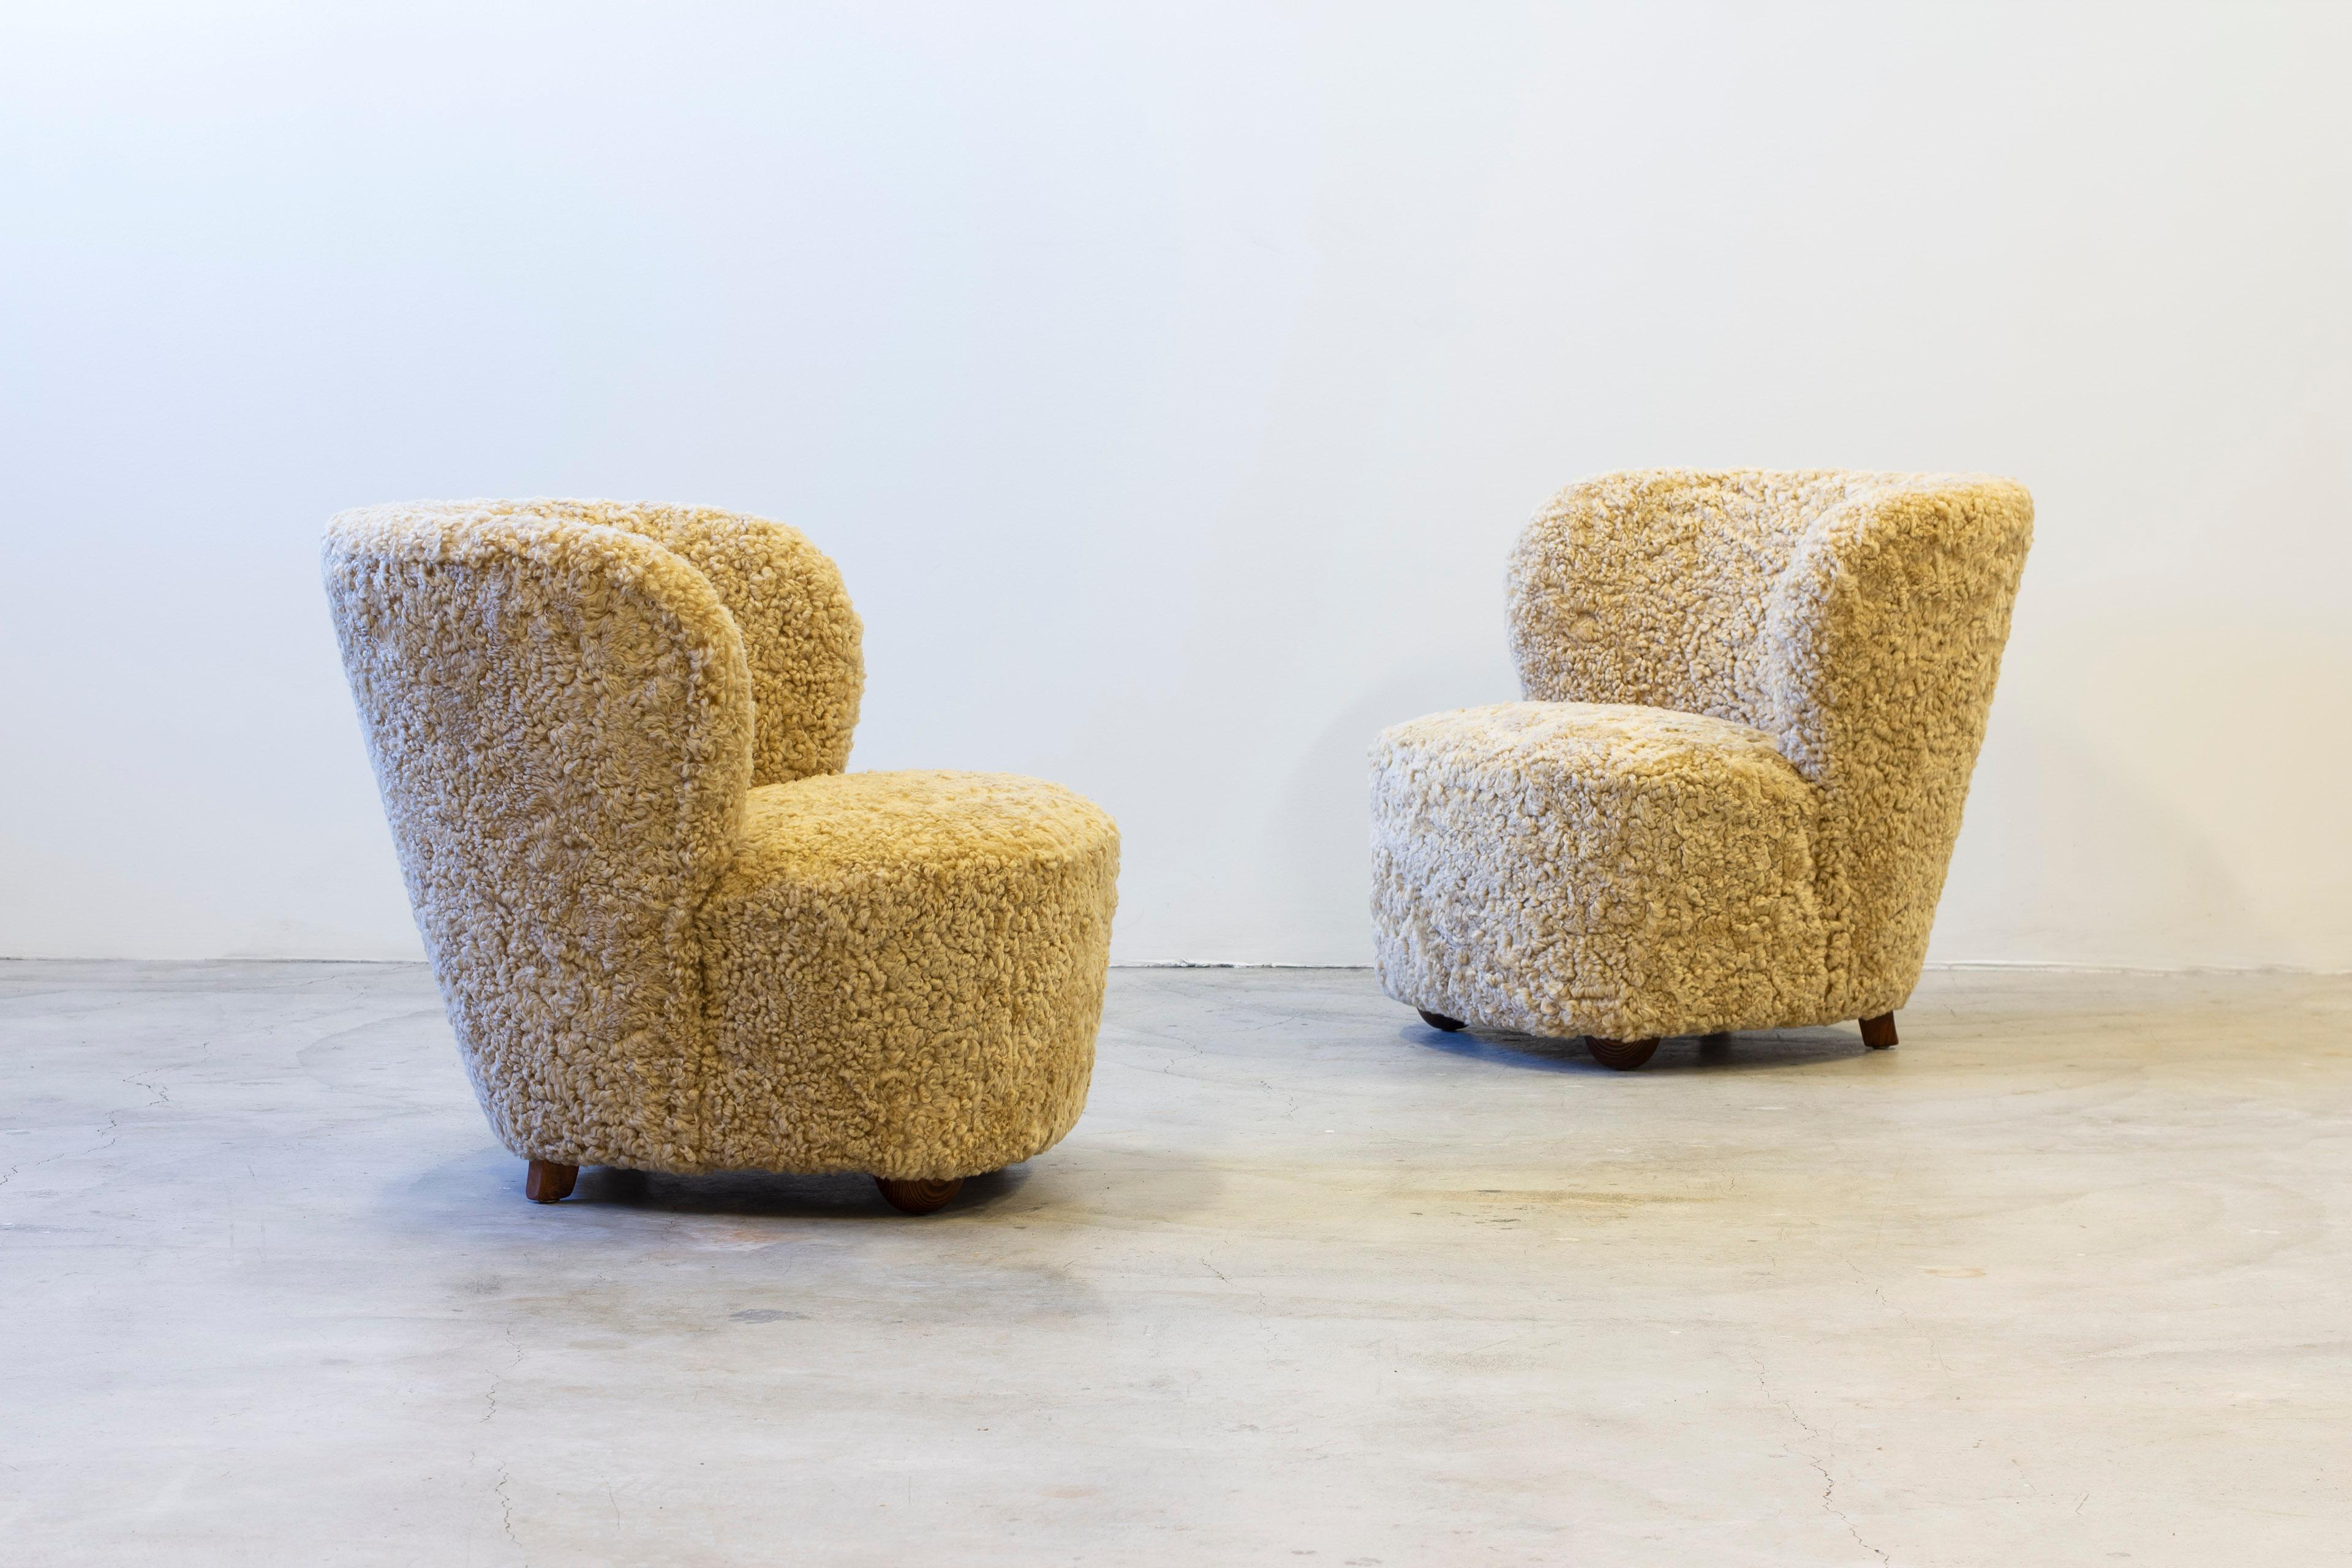 Pair of lounge chairs in the manner of Viggo Boesen. Designed and produced in Denmark by Danish cabinetmaker. Legs in dark stained oak and Beige colored sheepskin upholstery. Upholstery is new and in excellent condition. Very good condition with few